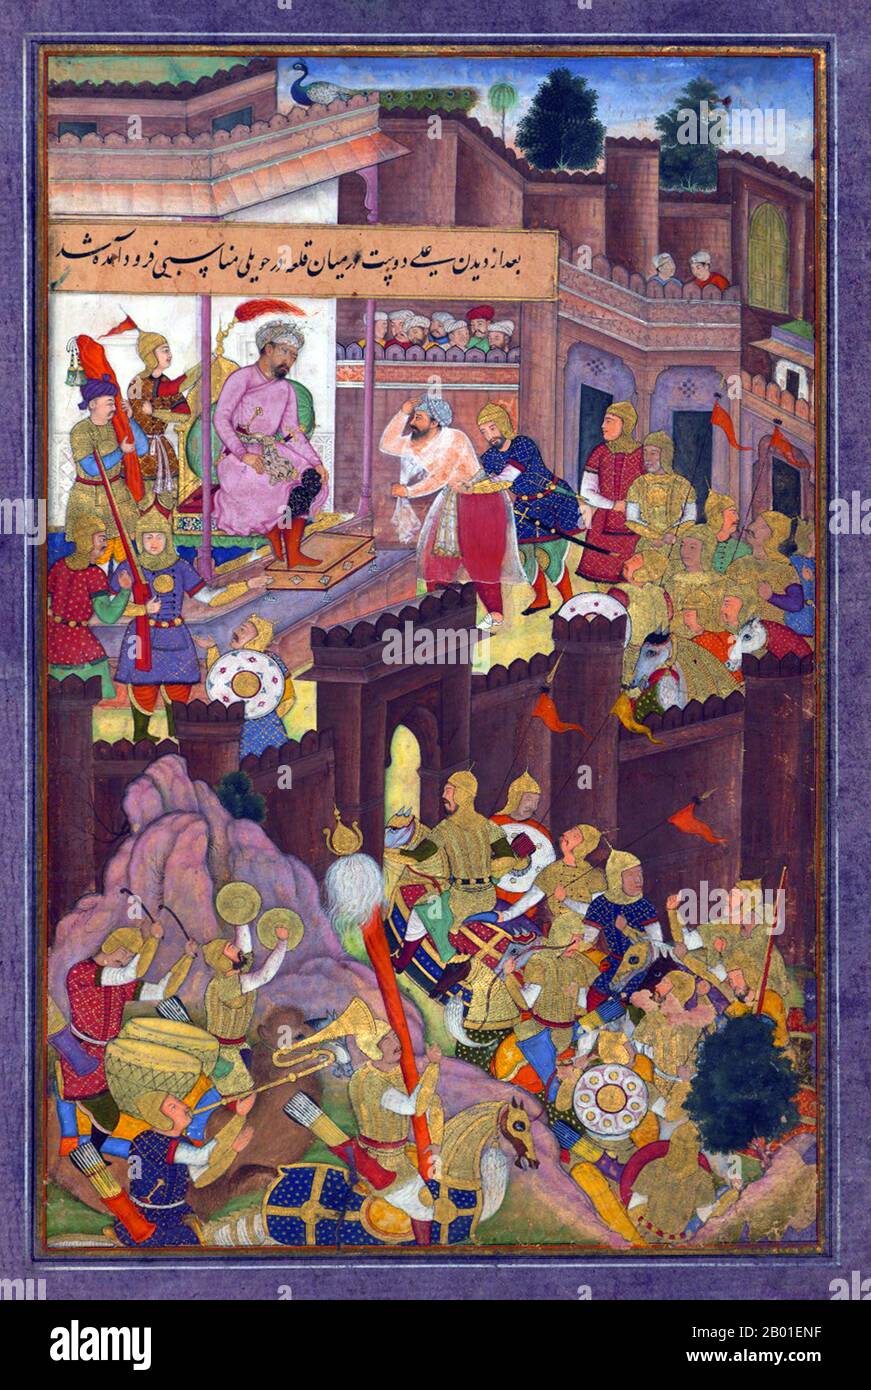 India: Having opened the gates of Murghīnān Fort, ʿAlī Dūst Ṭaghāyī pays homage to Babur. Miniature painting from the Baburnama, late 16th century.  Bāburnāma (literally: 'Book of Babur' or 'Letters of Babur'; alternatively known as Tuzk-e Babri) is the name given to the memoirs of Ẓahīr ud-Dīn Muḥammad Bābur (1483-1530), founder of the Mughal Empire and a great-great-great-grandson of Timur. It is an autobiographical work, originally written in the Chagatai language, known to Babur as 'Turki' (meaning Turkic), the spoken language of the Andijan-Timurids. Stock Photo